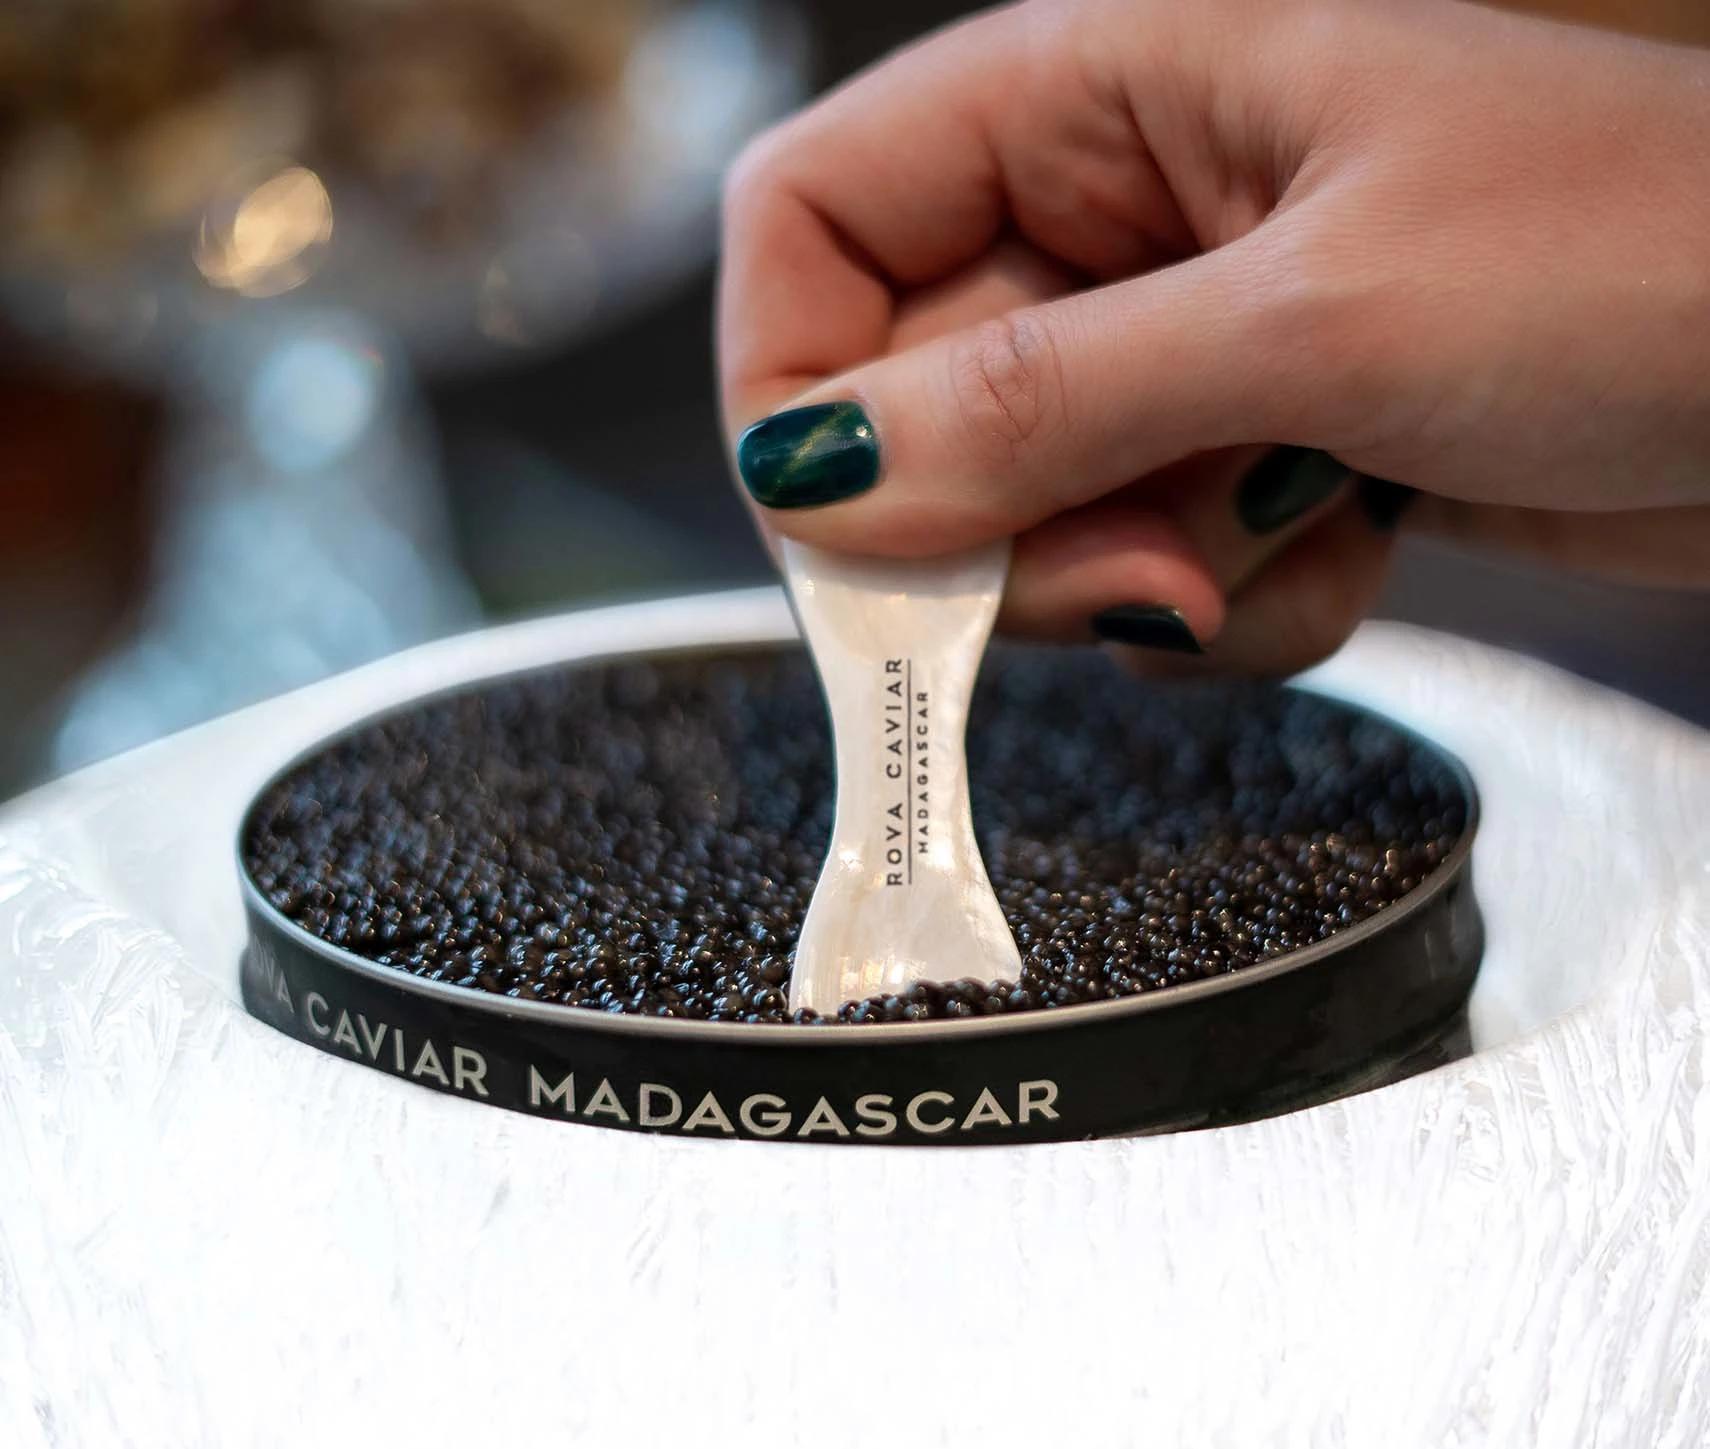 Hand using a mother-of-pearl spoon with caviar